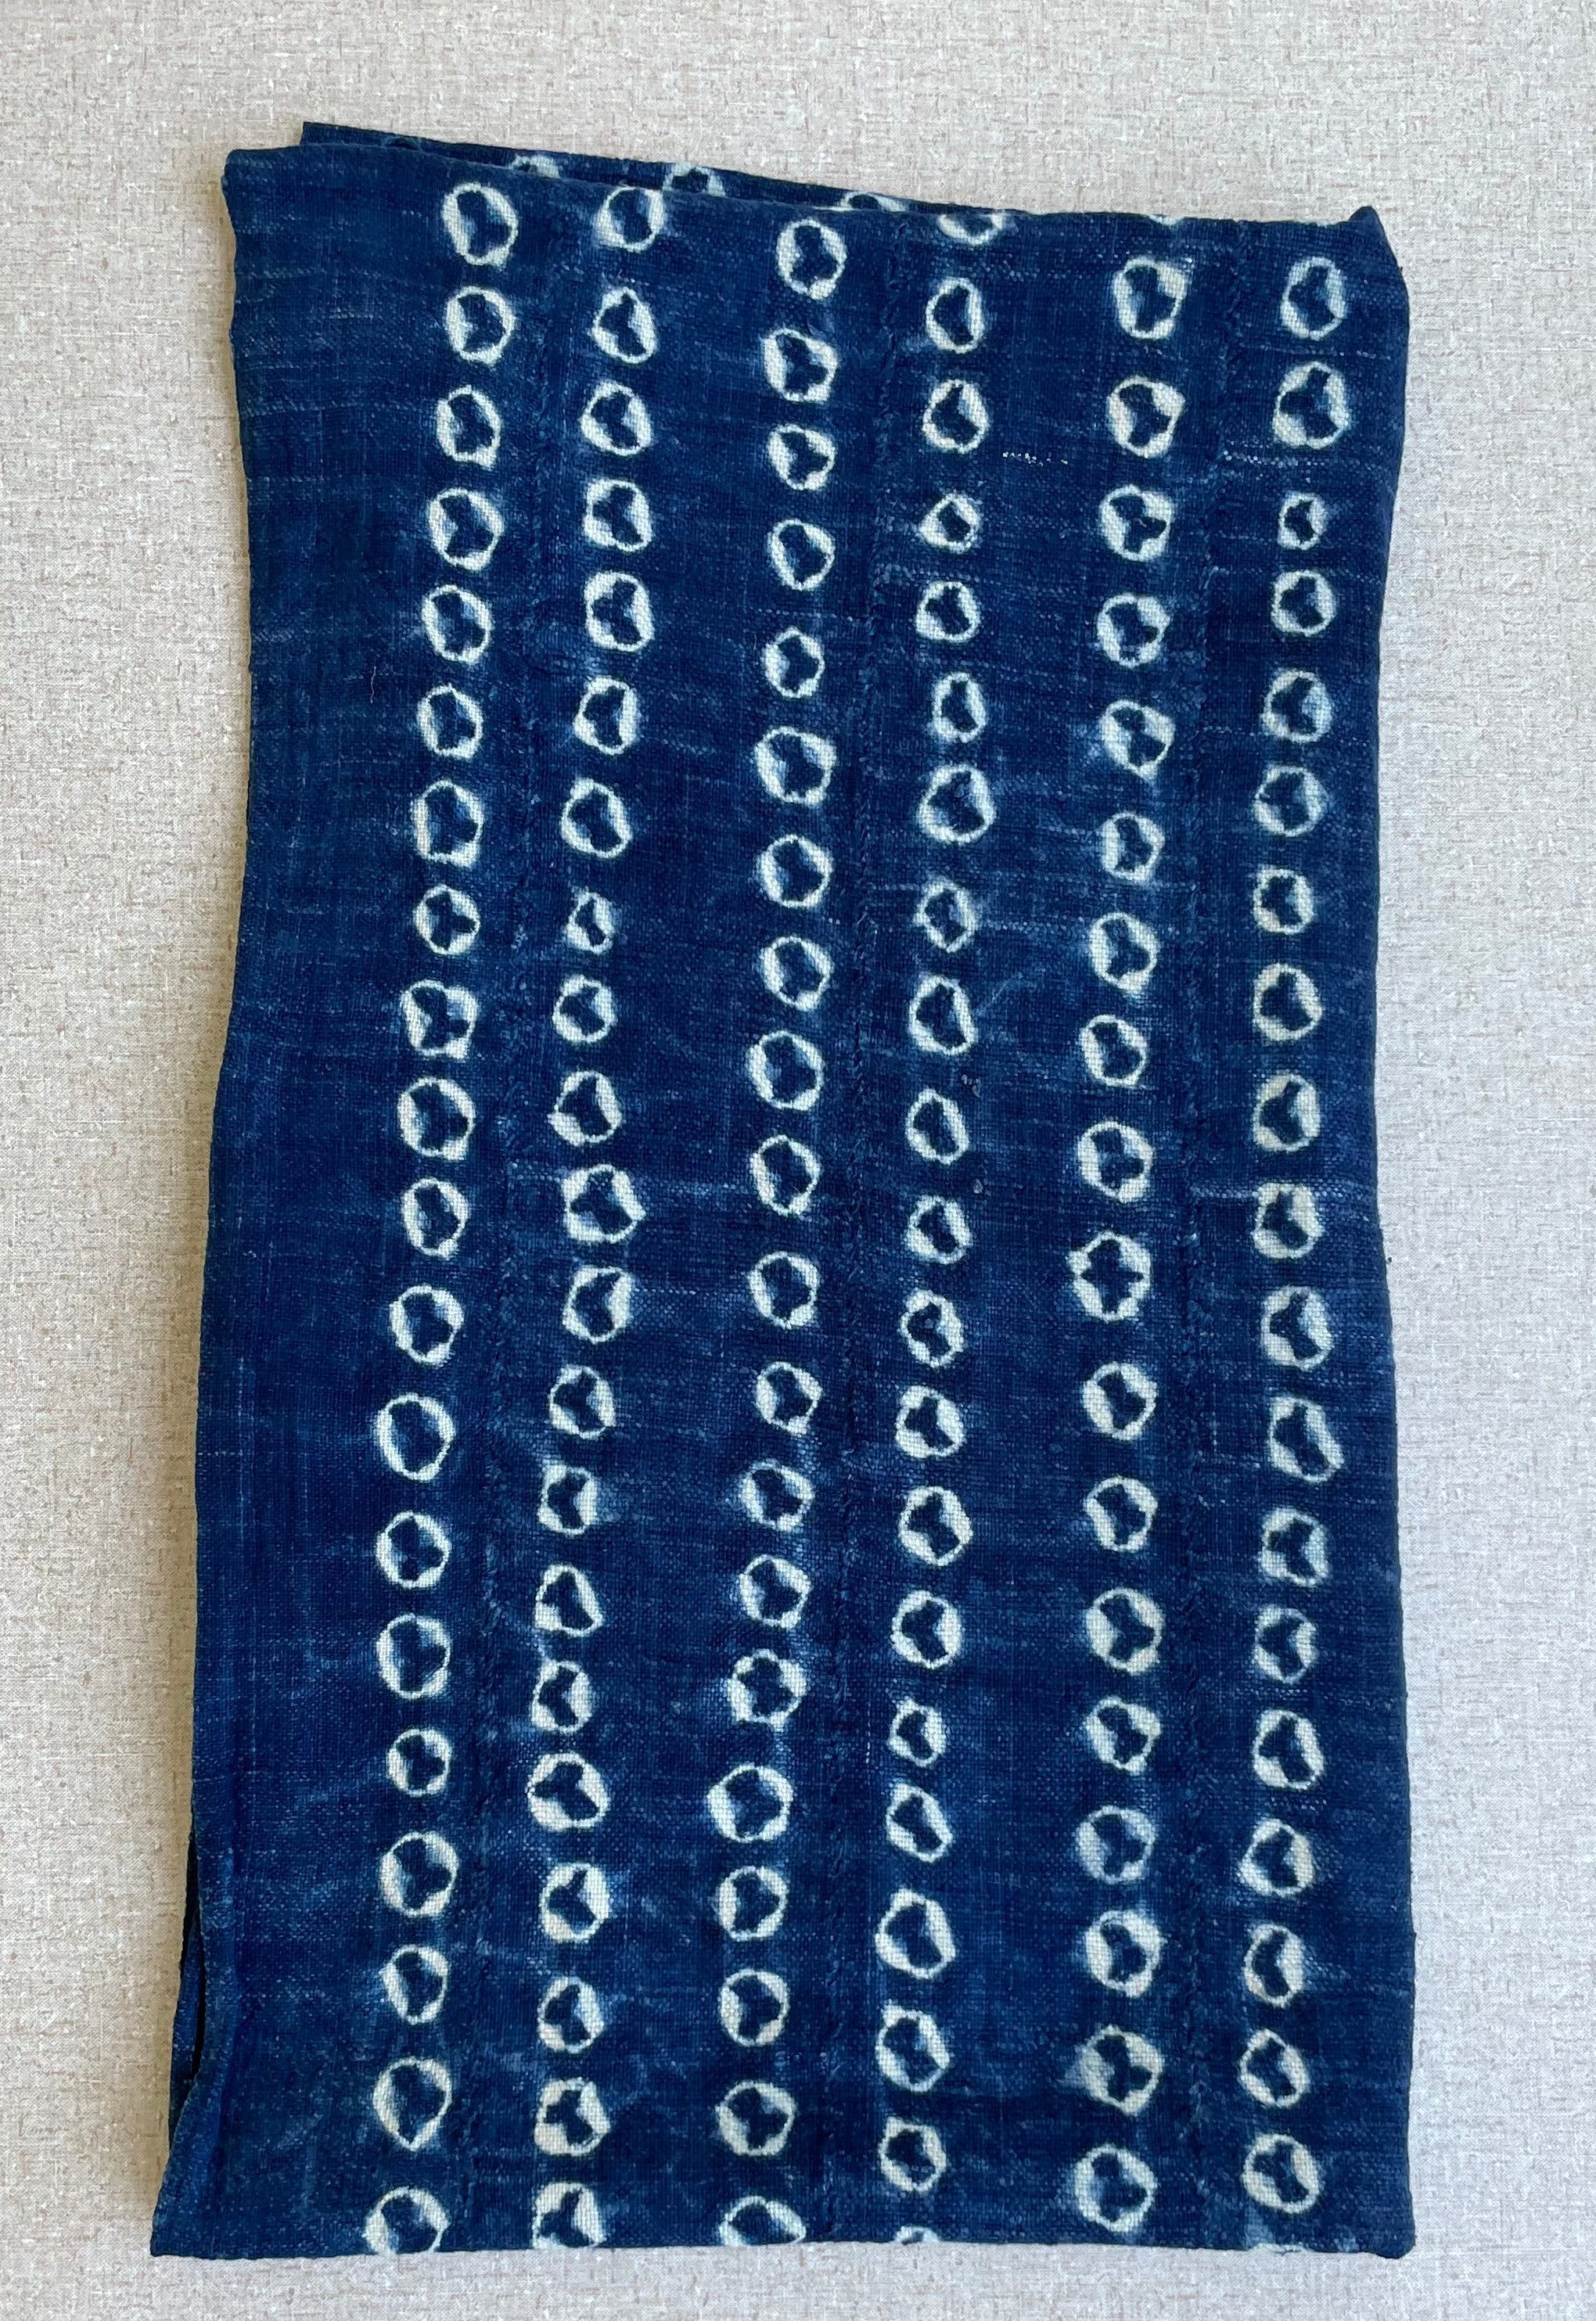 Handcrafted Textiles - Artisan Designed - Handcrafted African Art Textiles - Home Decor - Living Spaces - Mix Colors - Bold Patterns - Traditional Designs - African Culture - This Indigo Shibori Tie Dye Cotton Fabric is a stunning combination of African textile and hand-dyed color. Expertly crafted with attention to detail, this beautiful scarf provides long-lasting durability and a unique flair to any ensemble.  Length: 63 inches  Width: 24 inches